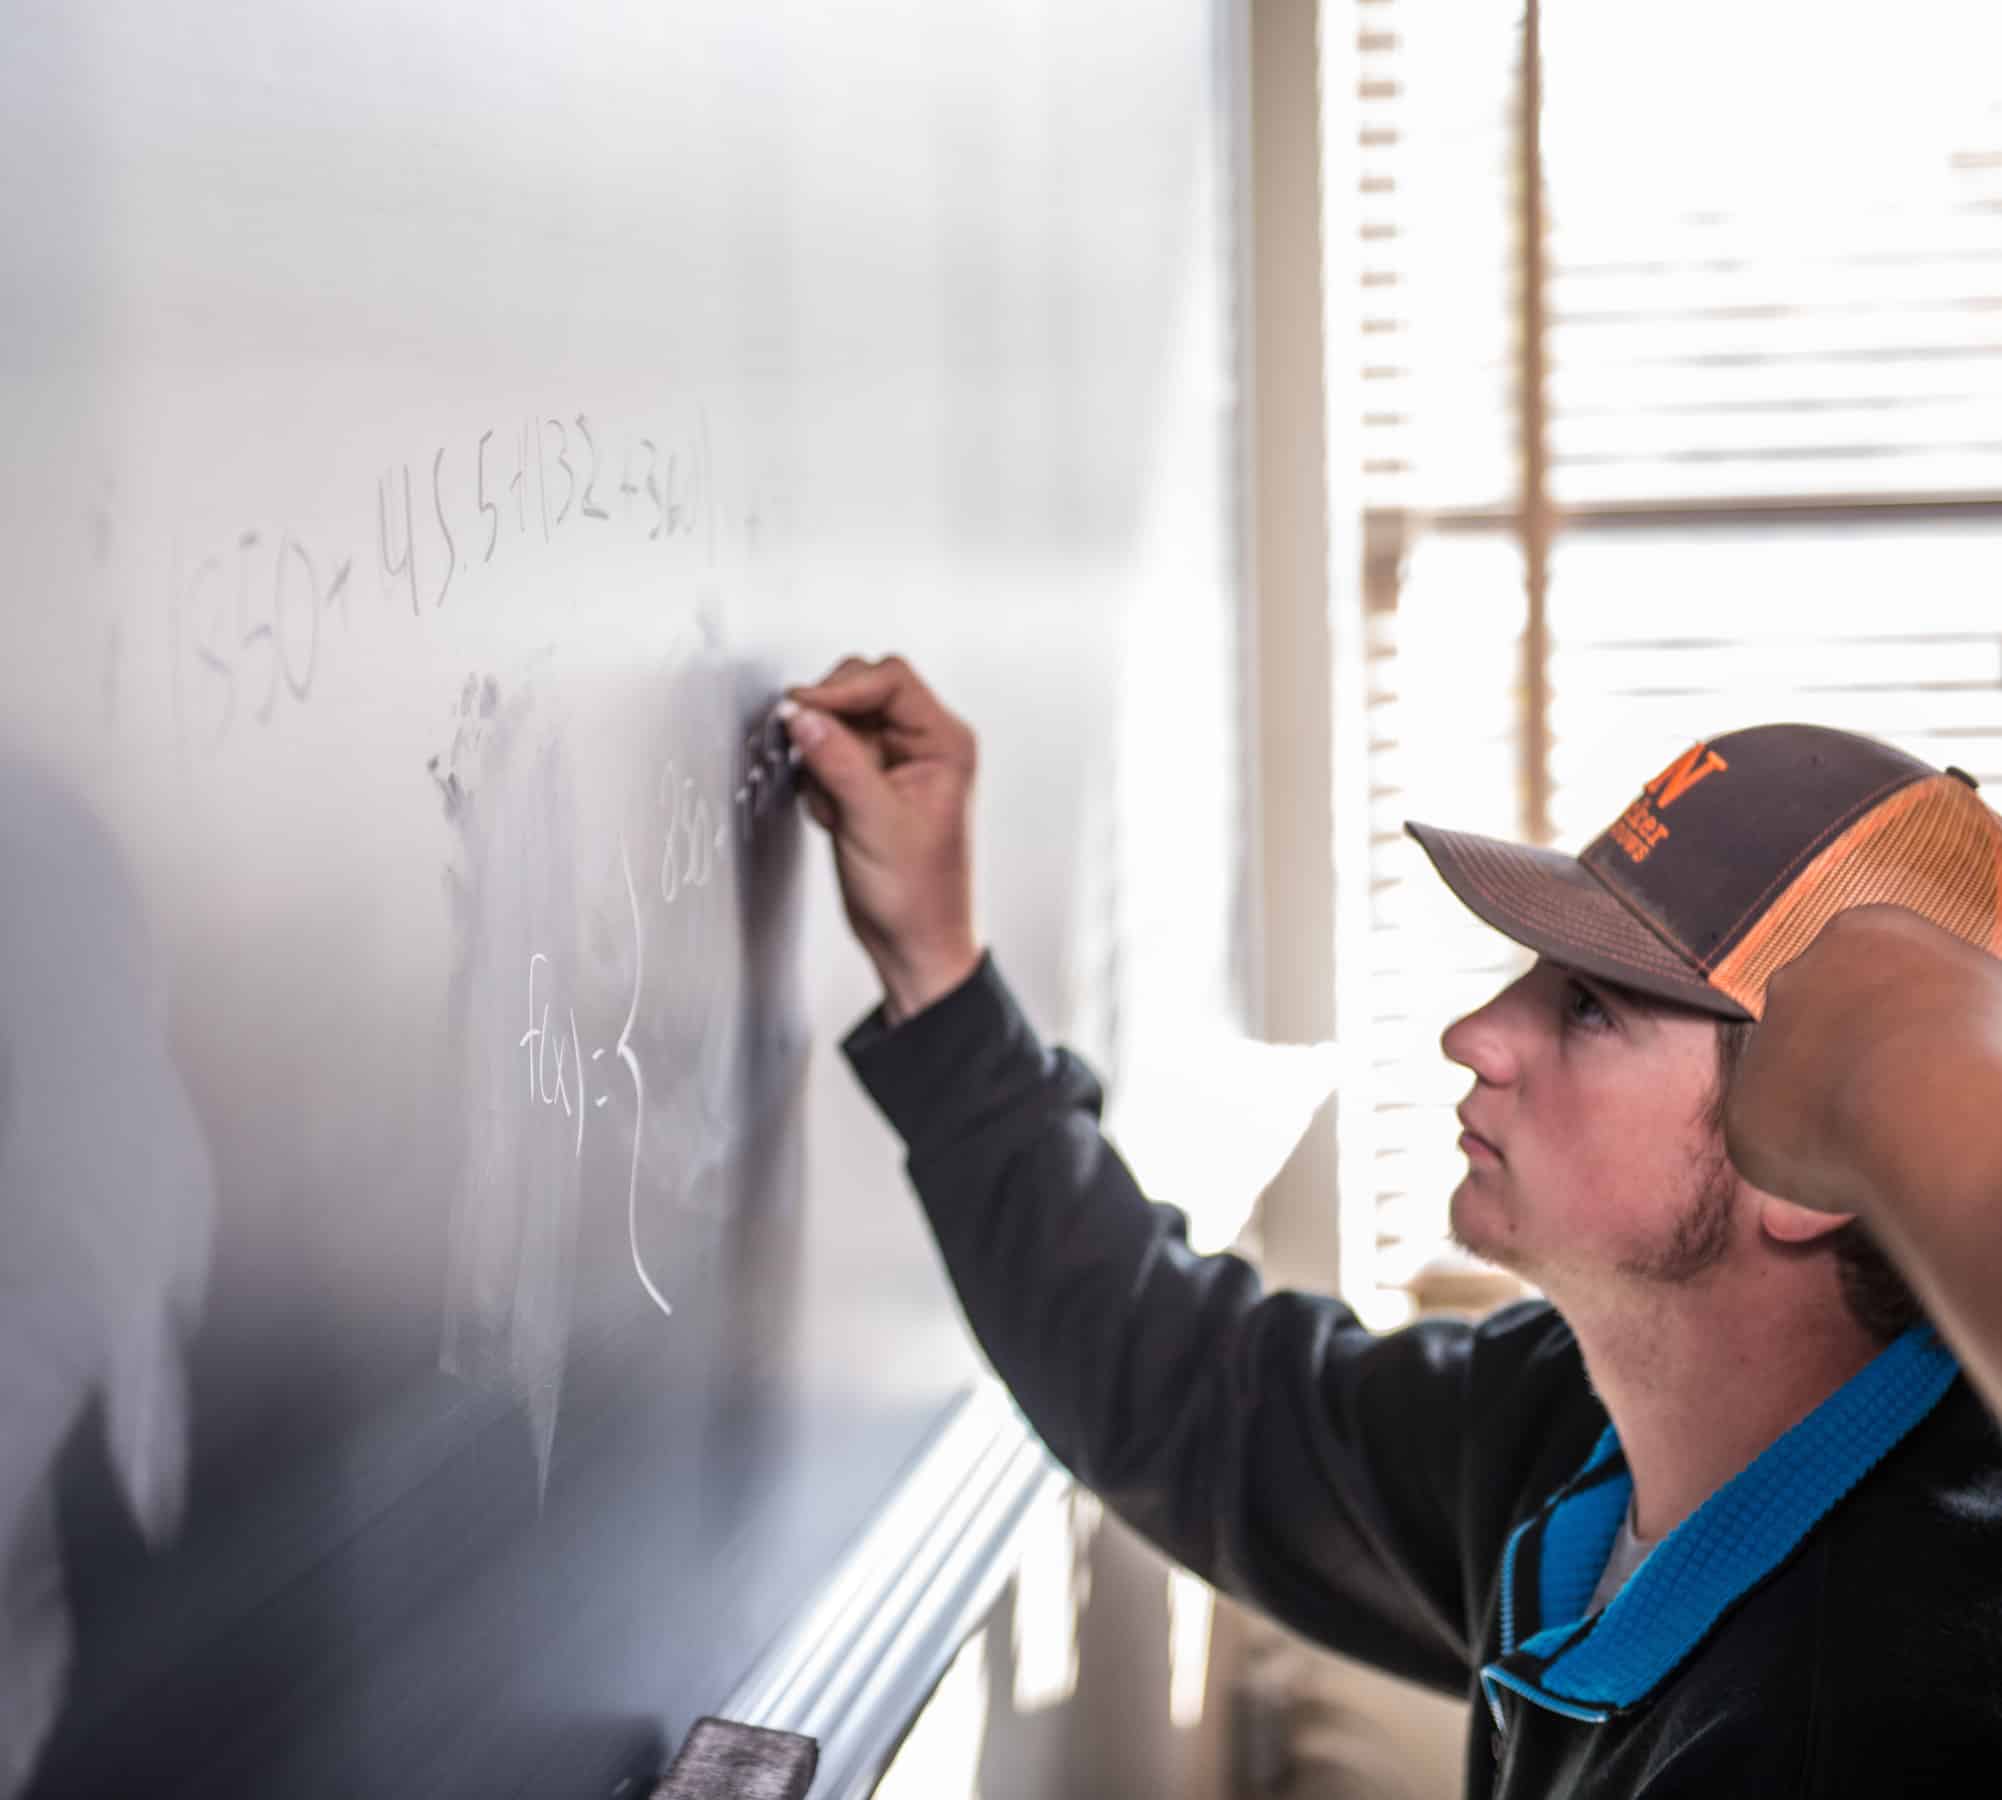 Math student working out problem on chalkboard